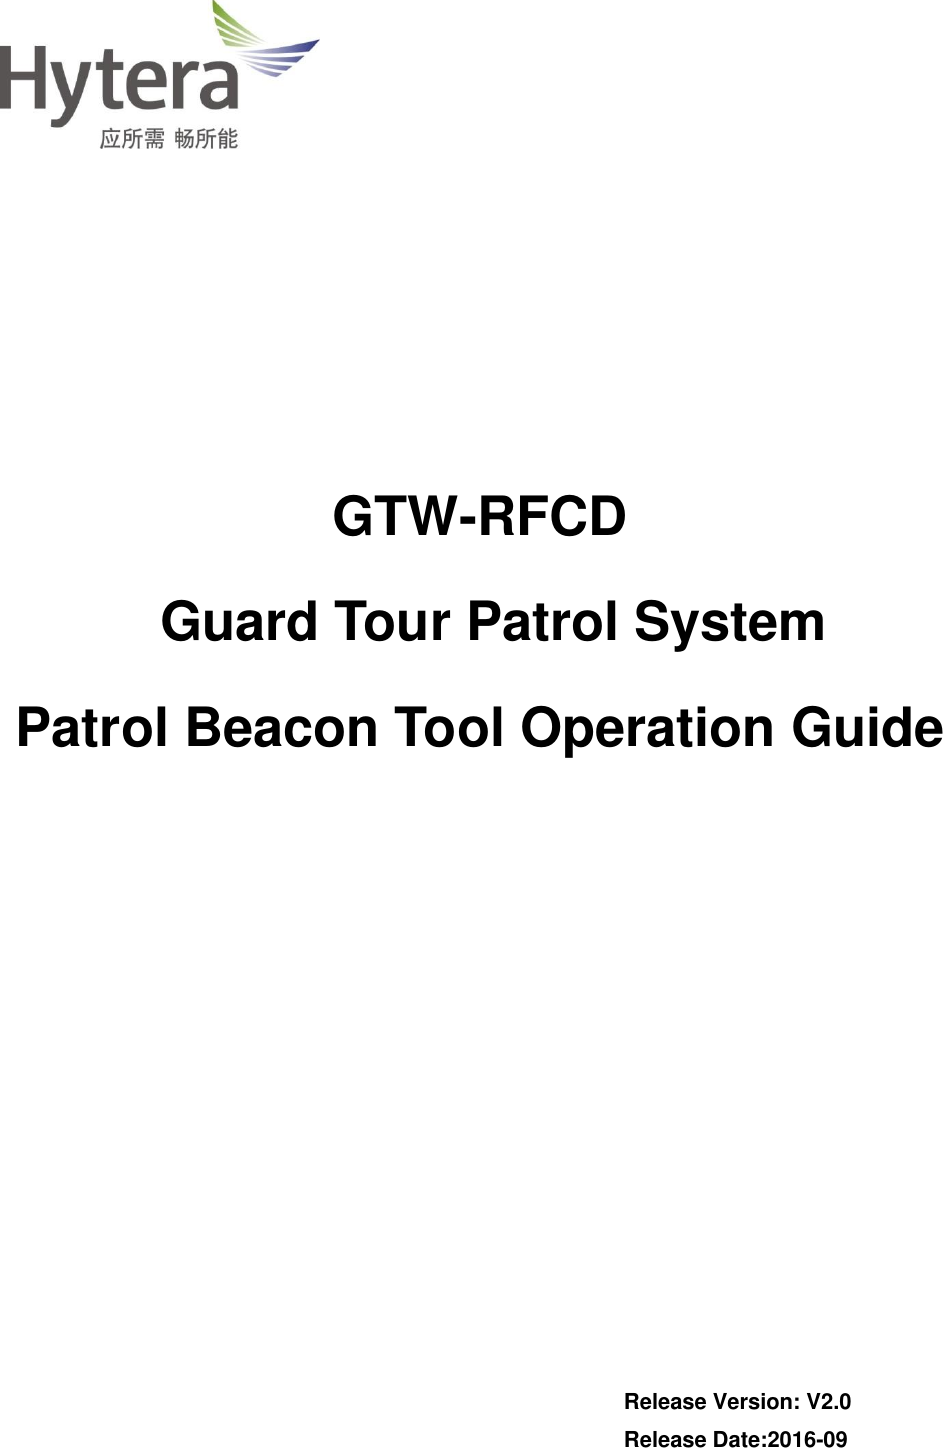            GTW-RFCD   Guard Tour Patrol System Patrol Beacon Tool Operation Guide            Release Version: V2.0 Release Date:2016-09